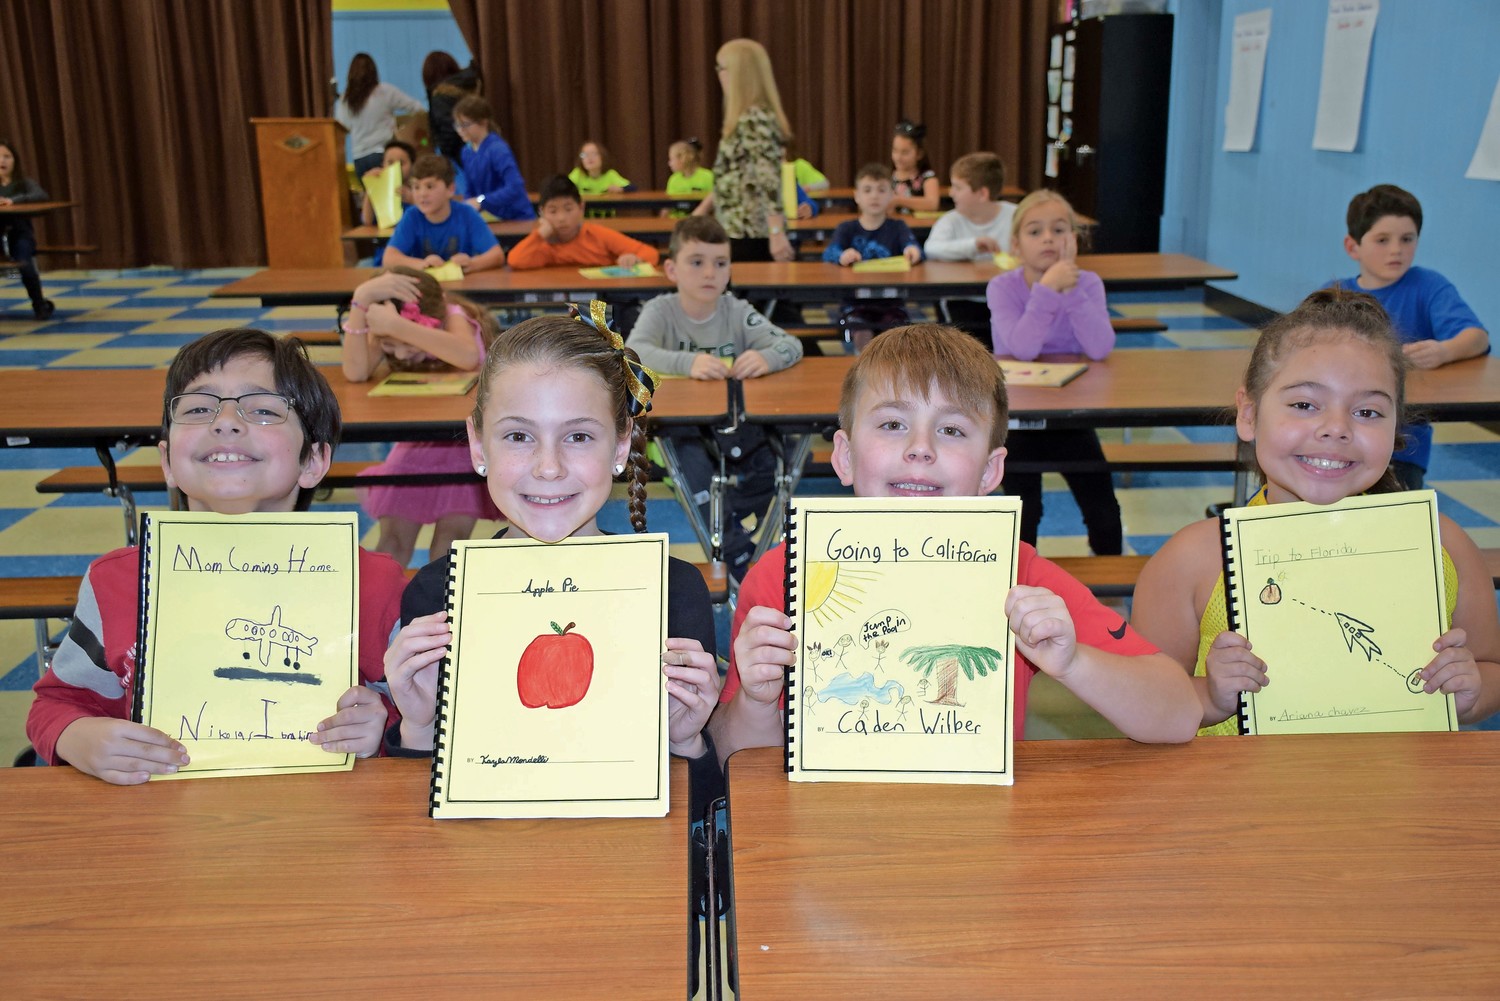 Mandalay Elementary School third-graders, from left, Nikolas Ibrahim, Kayla Mondelli, Caden Wilber and Ariana Chavez were proud to present their personal narrative writing projects during the Personal Writing Celebration.